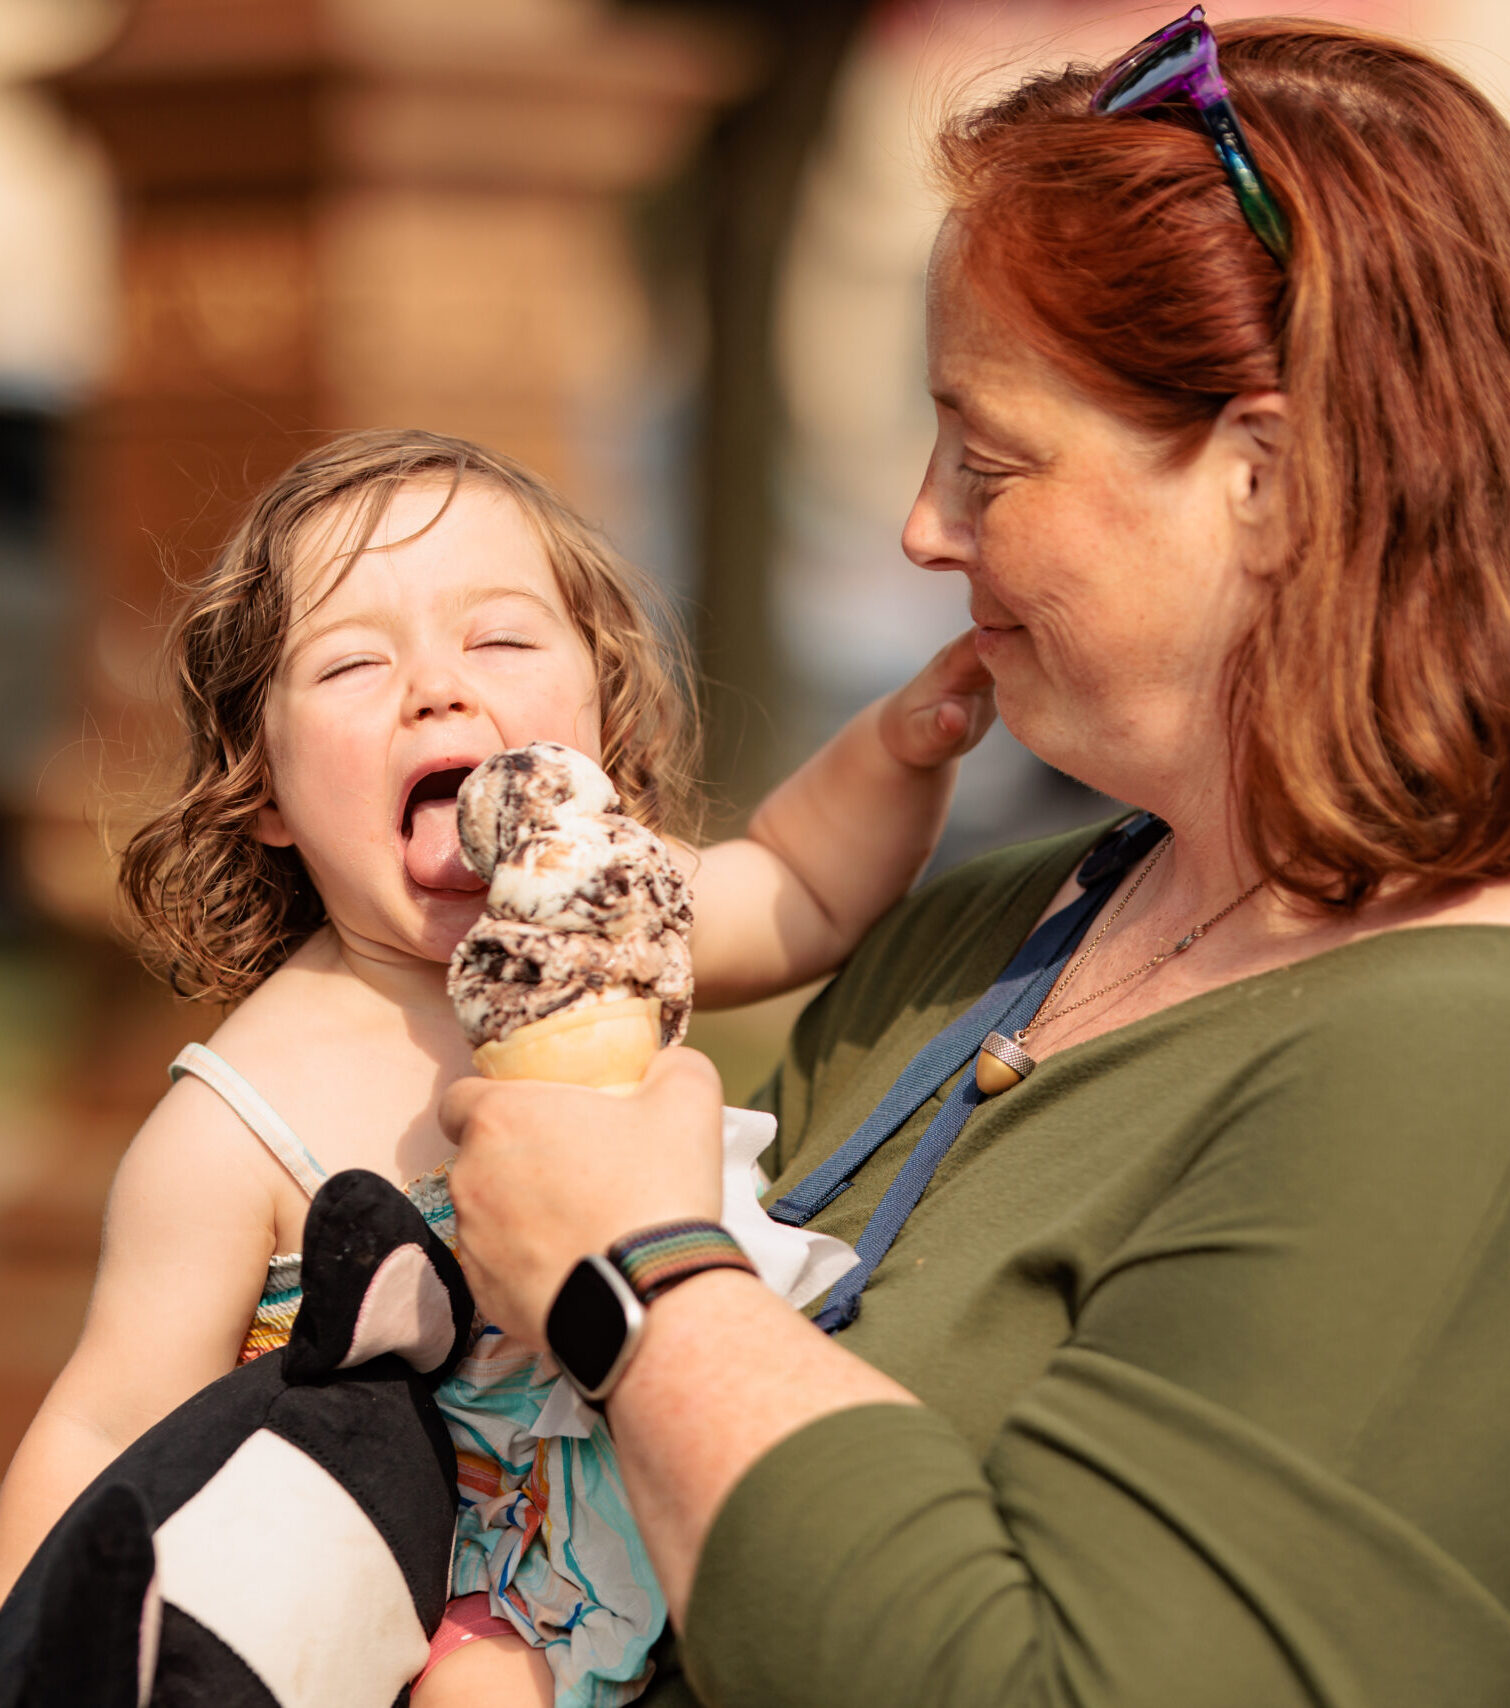 Woman holding a child eating ice cream